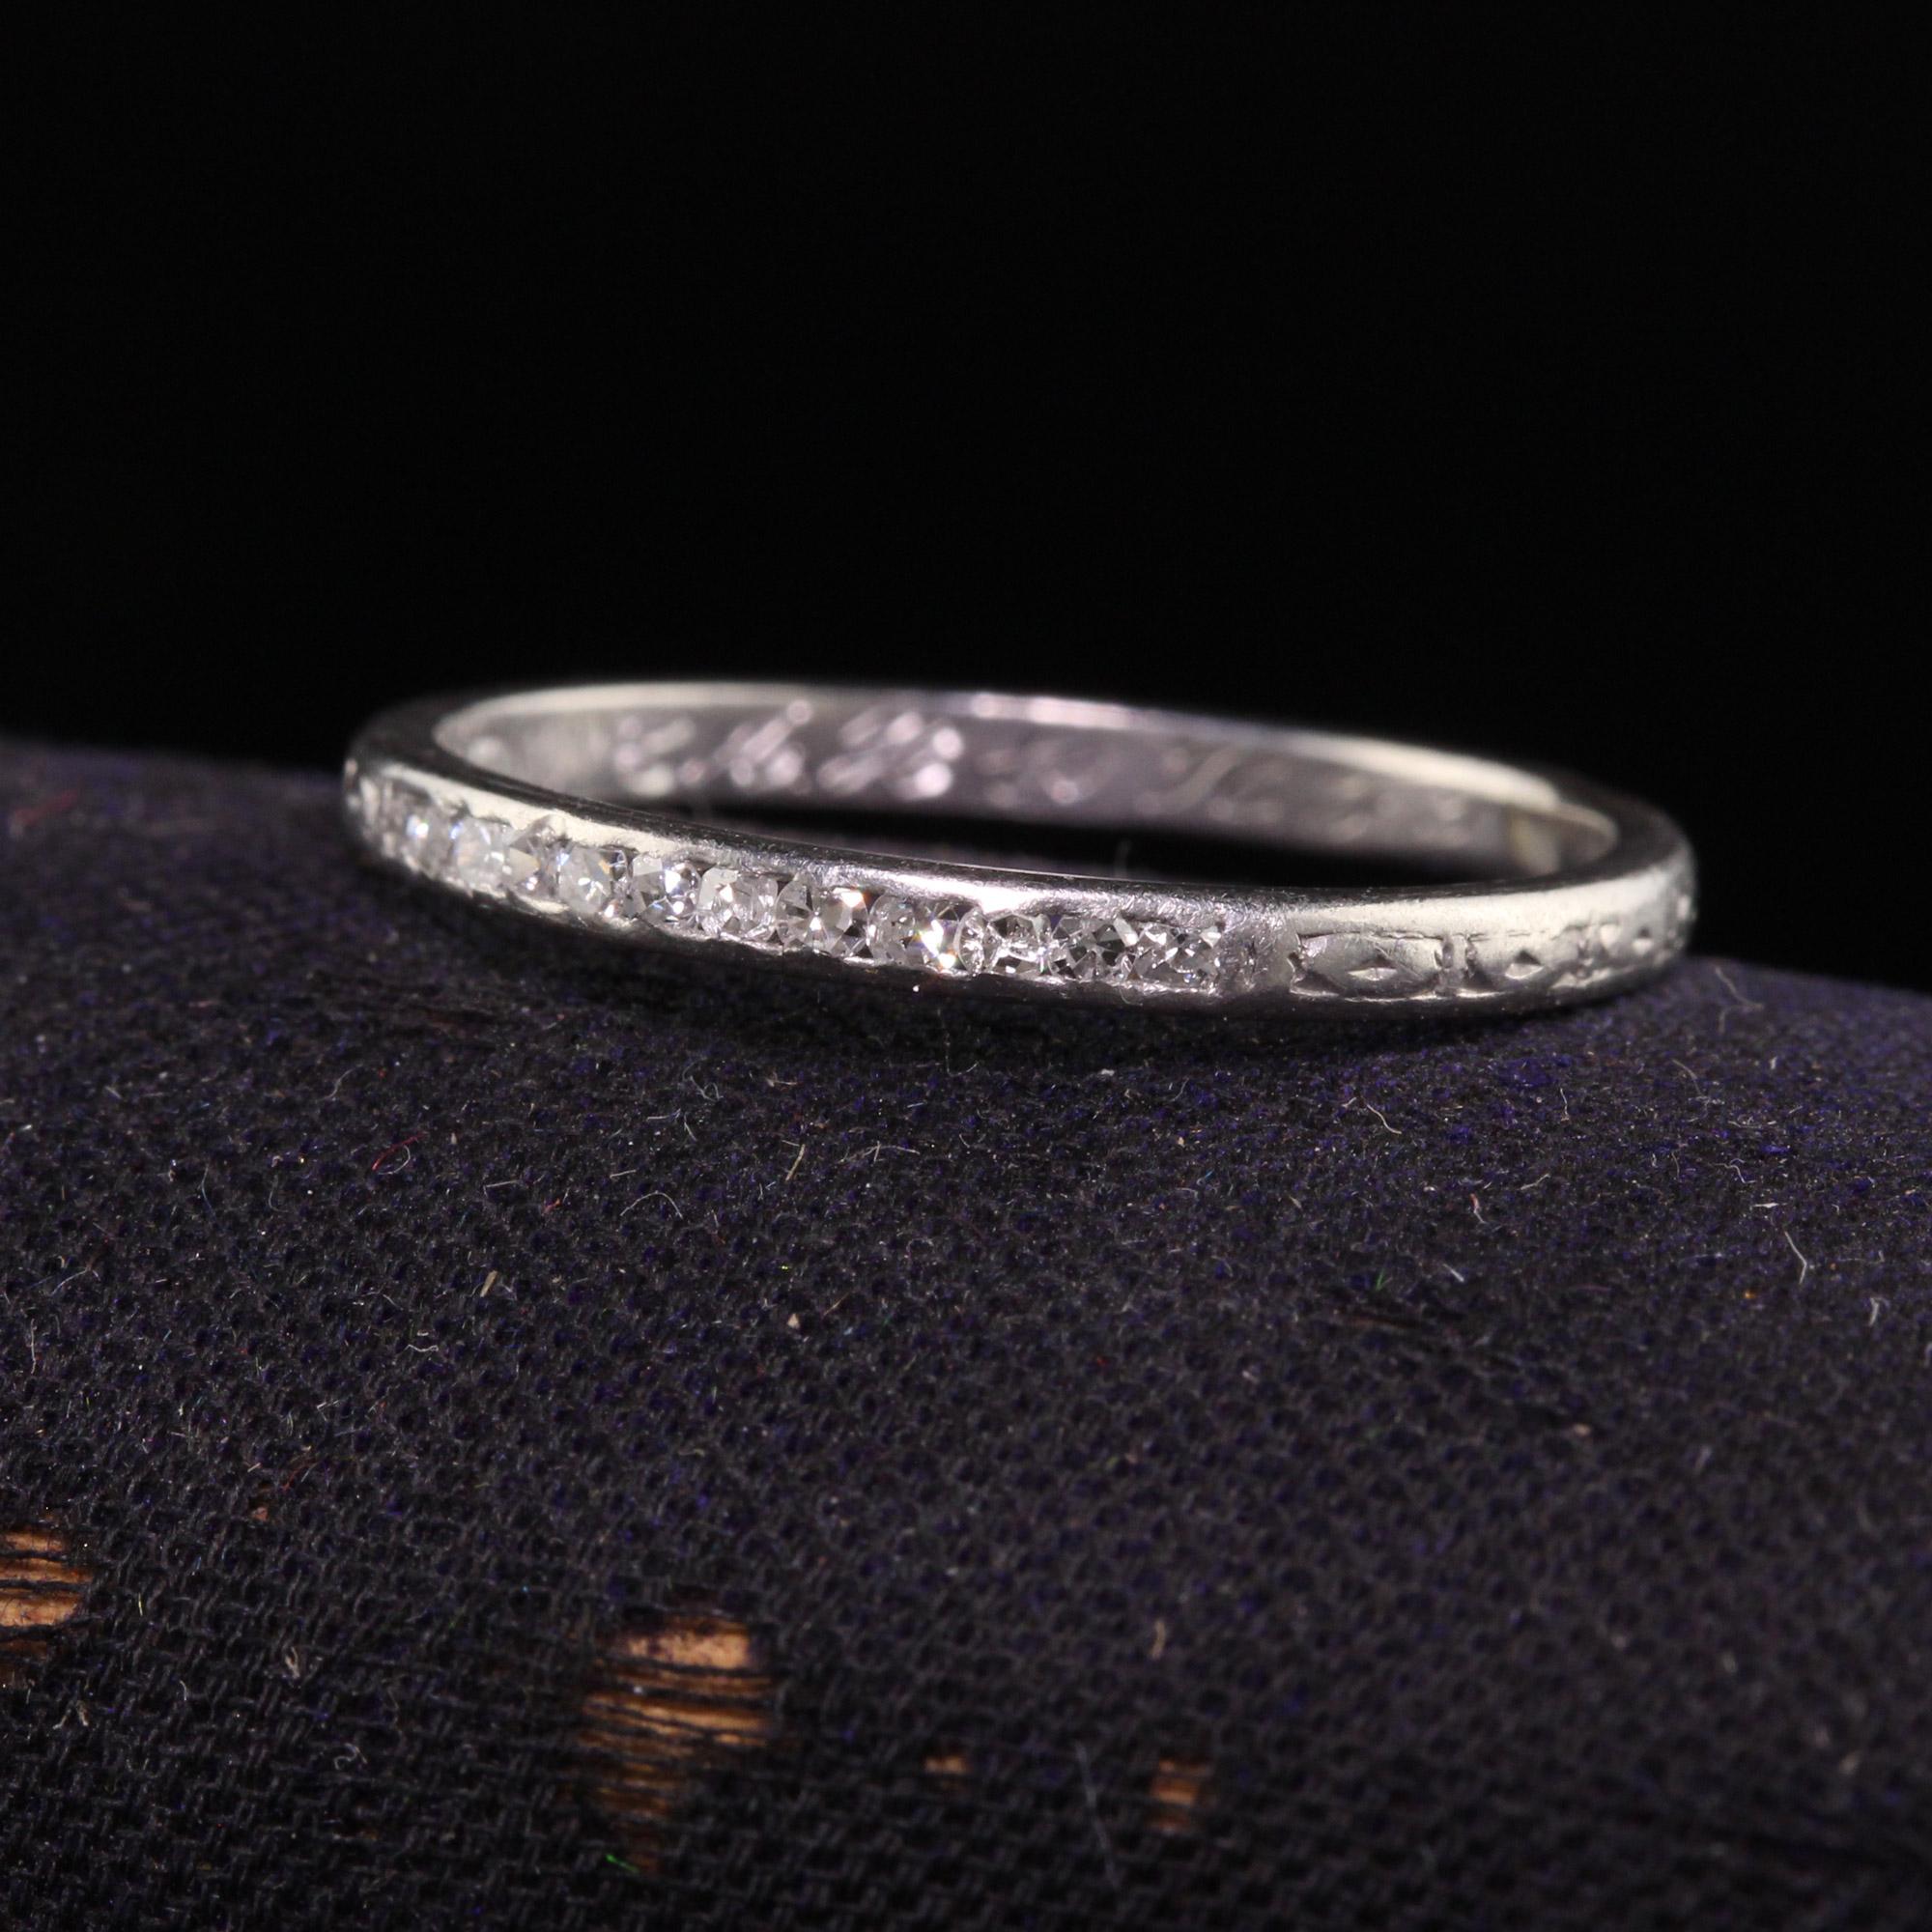 Beautiful Antique Art Deco Platinum Single Cut Diamond Engaved Wedding Band. This beautiful ring is crafted in platinum. This ring has single cut diamonds on the top row with engravings. The inside of the band is engraved 